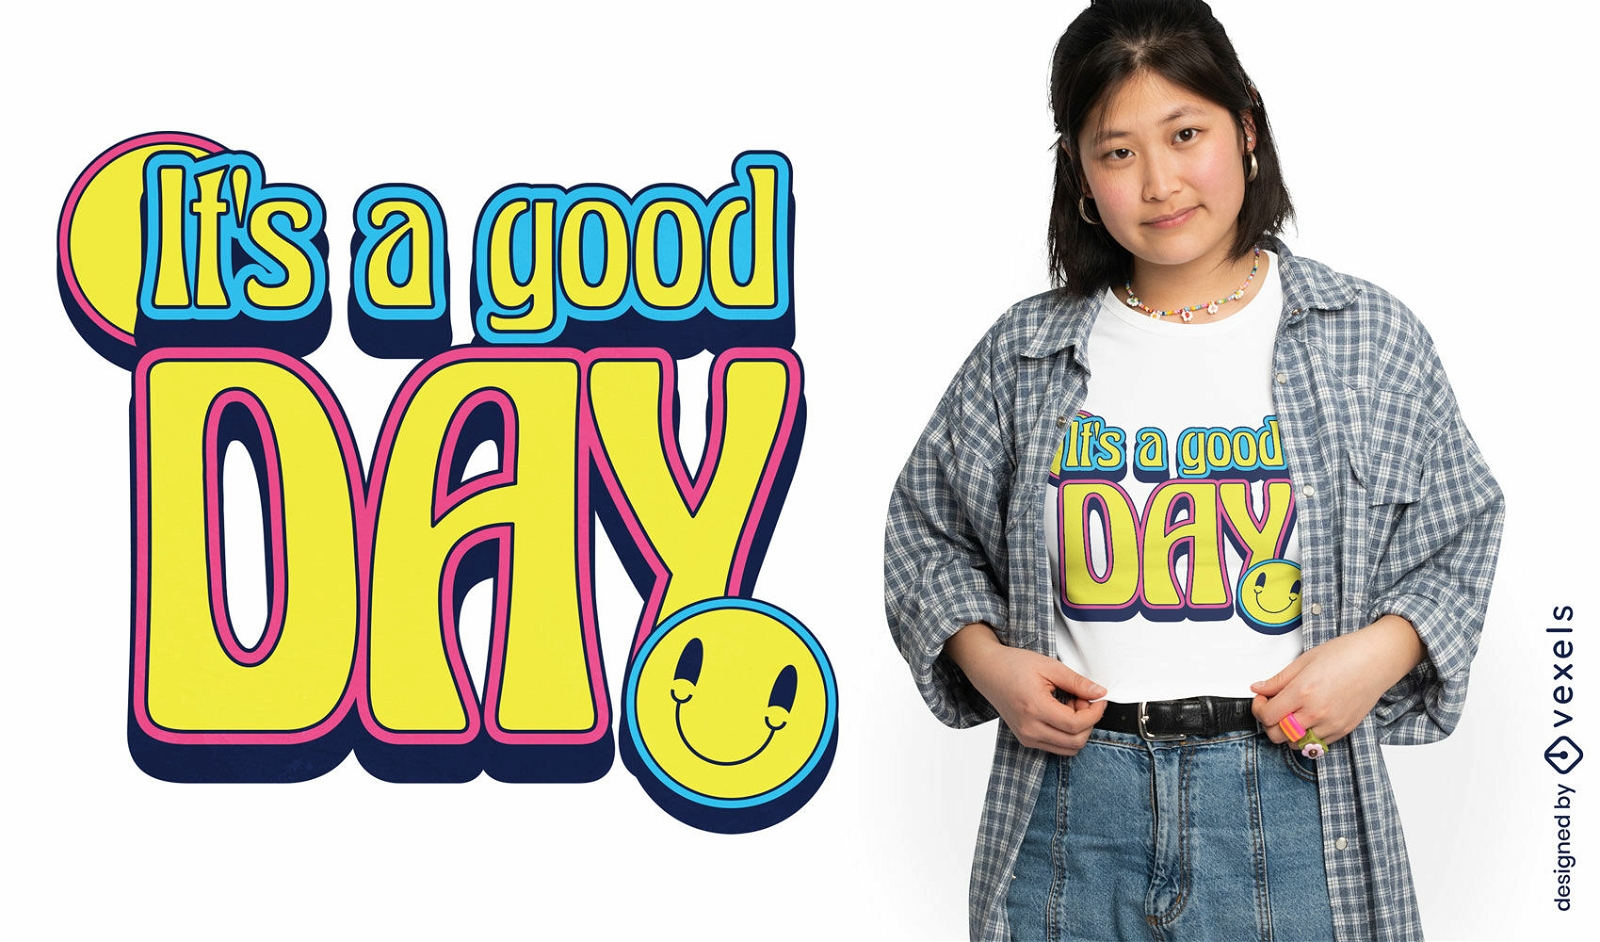 Good day happy quote t-shirt design